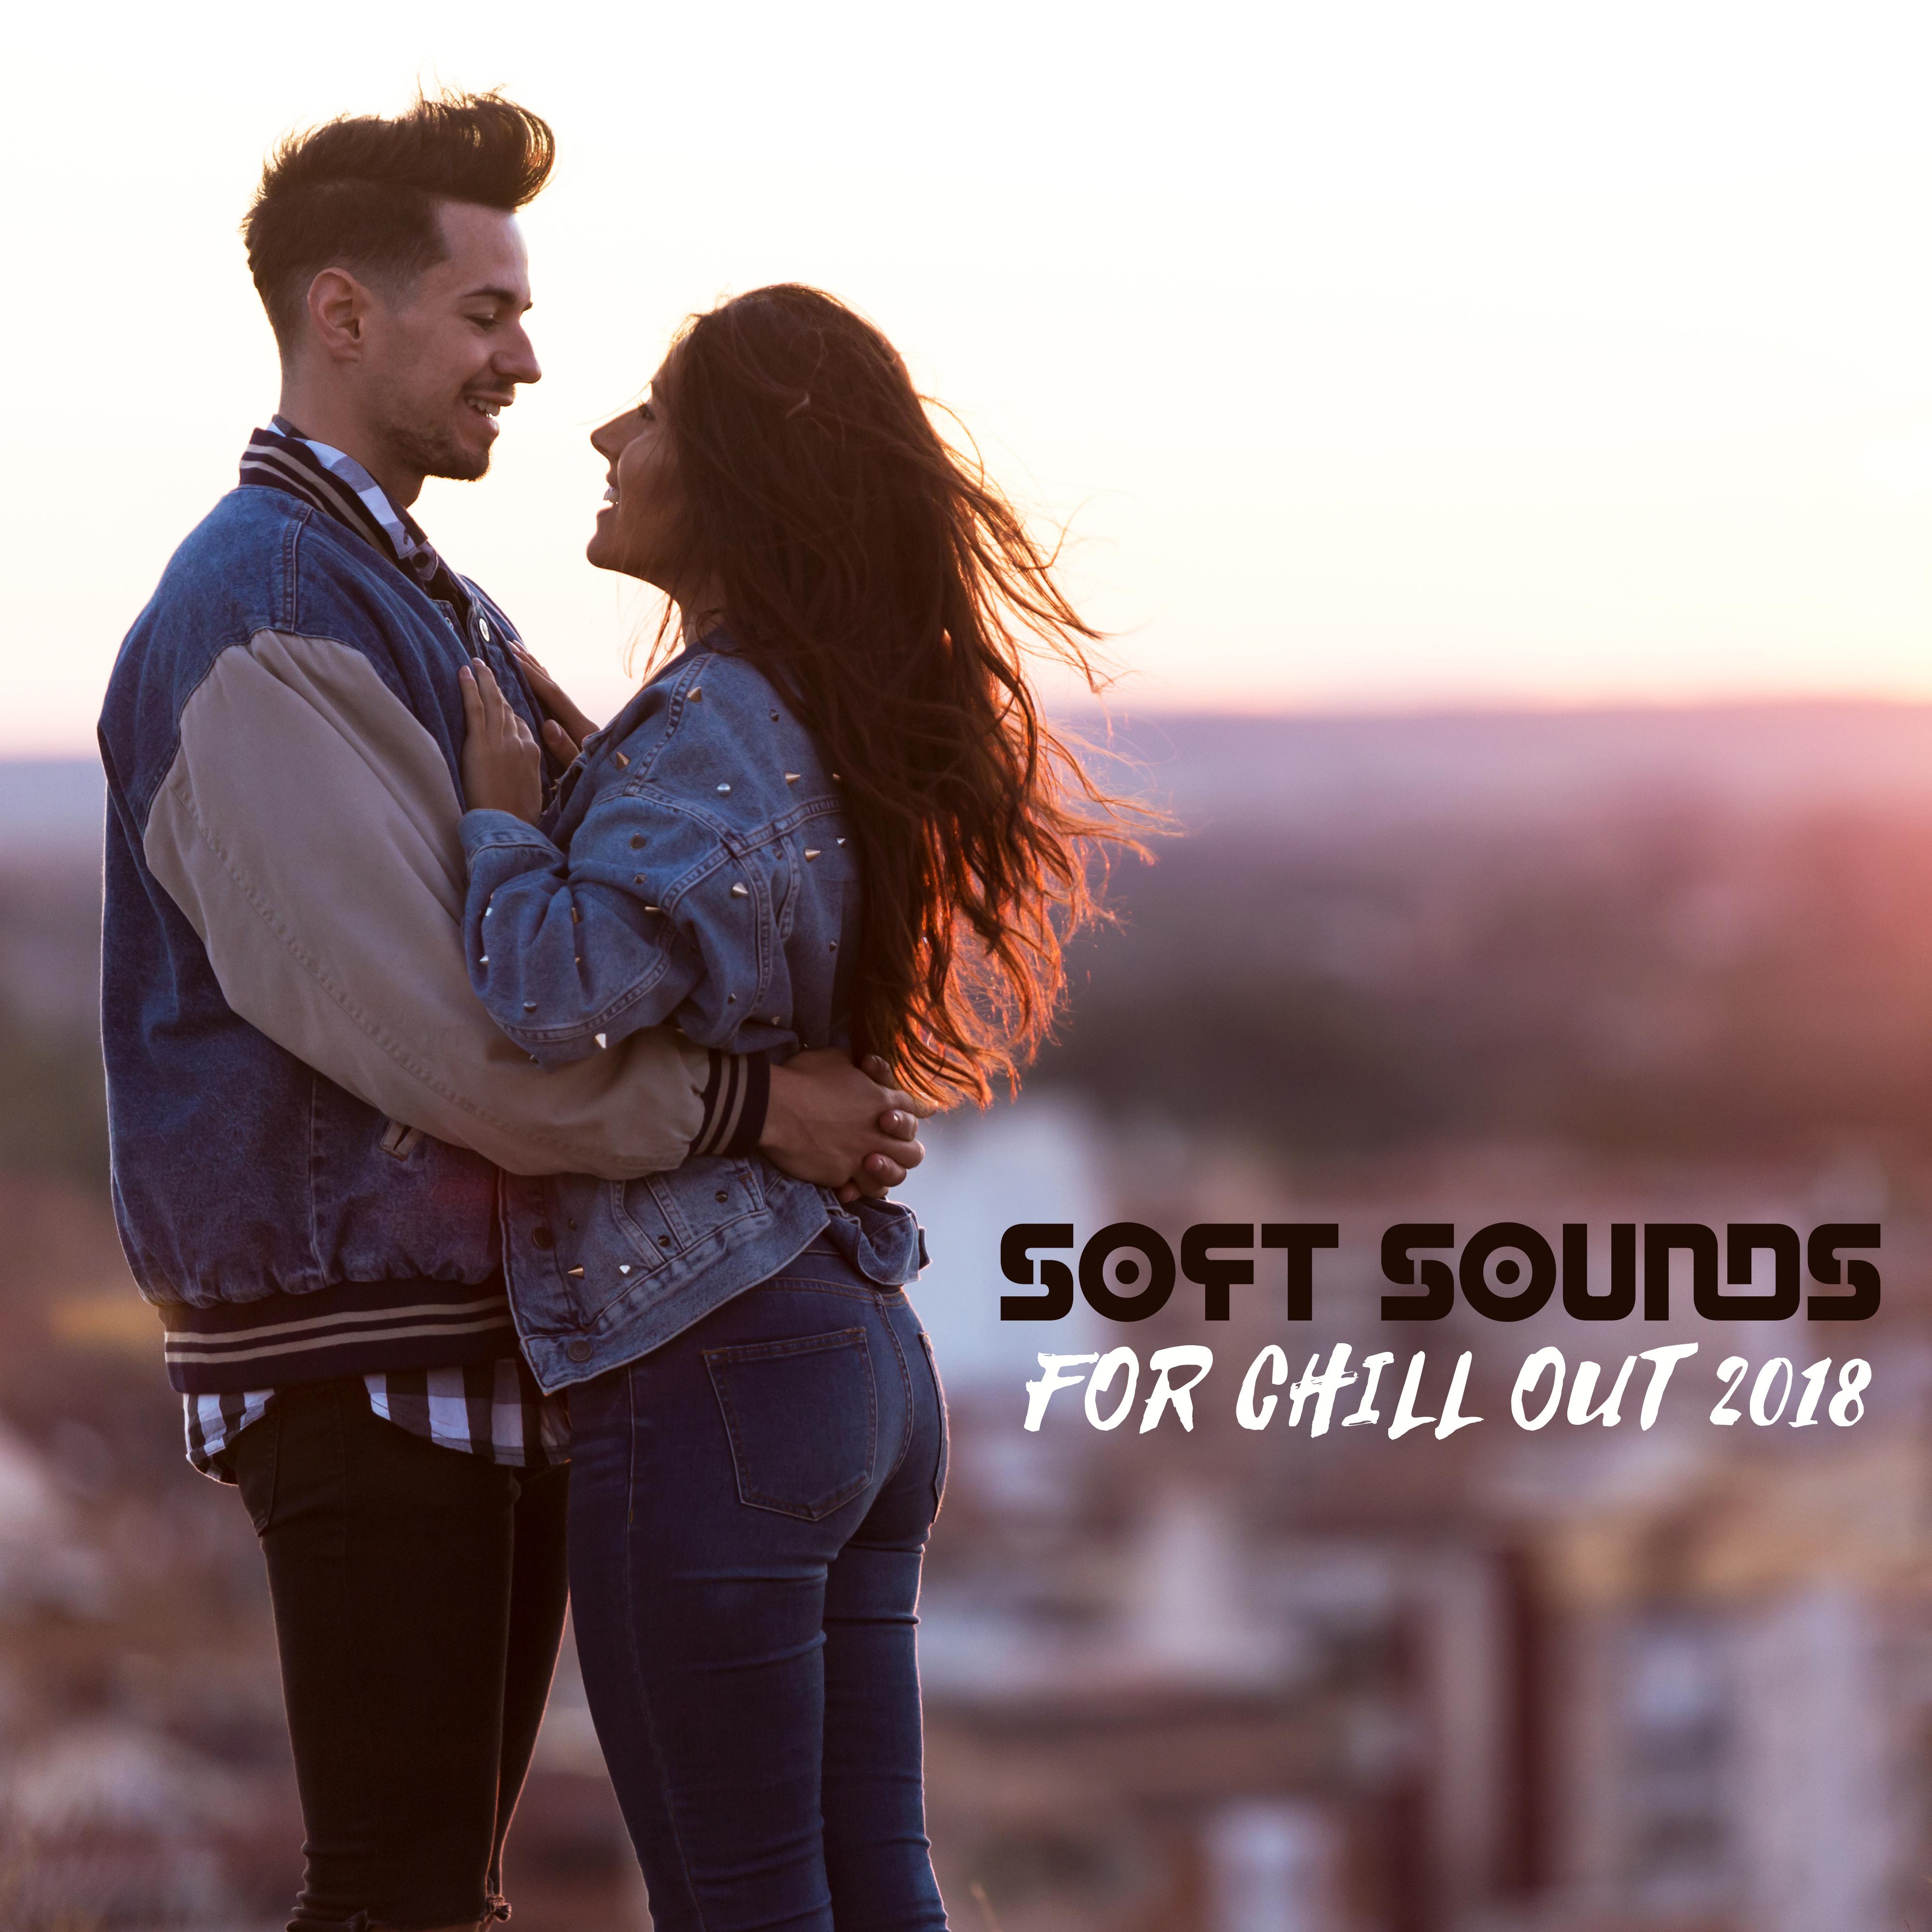 Soft Sounds for Chill Out 2018